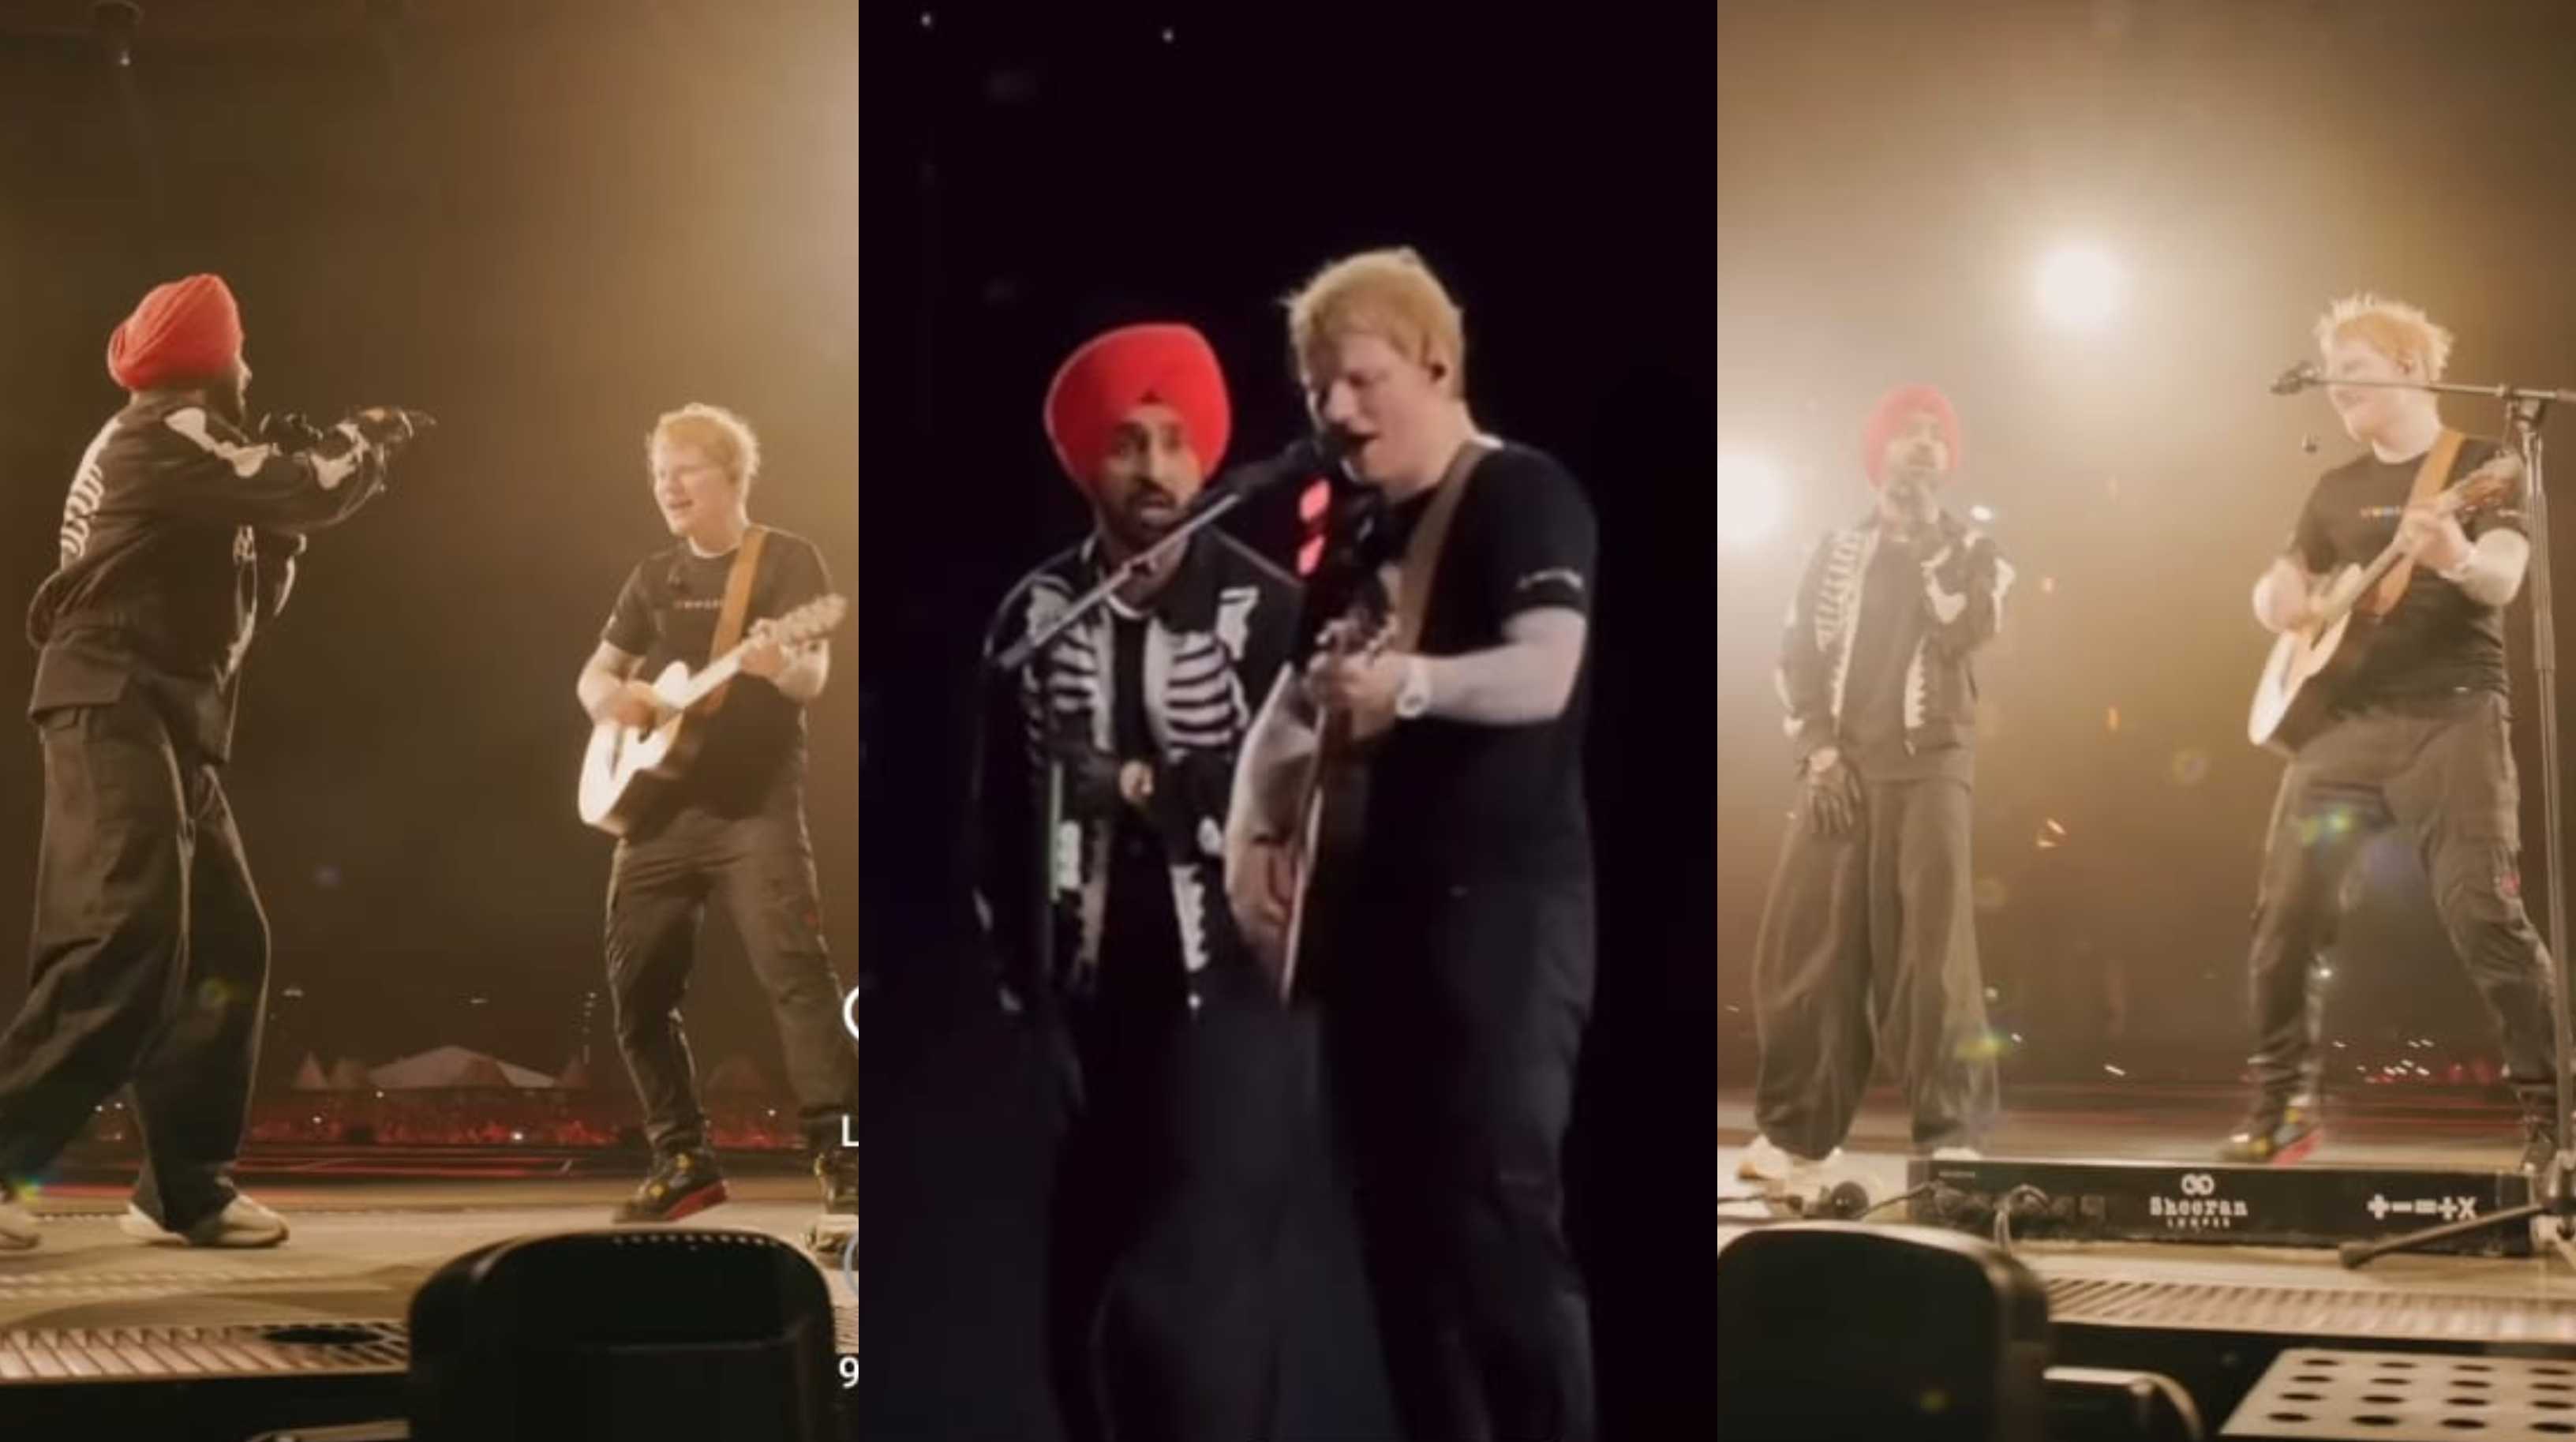 ‘Multiverse event’: Diljit Dosanjh joins Ed Sheeran on stage, latter sings in Punjabi sending fans into a frenzy; watch